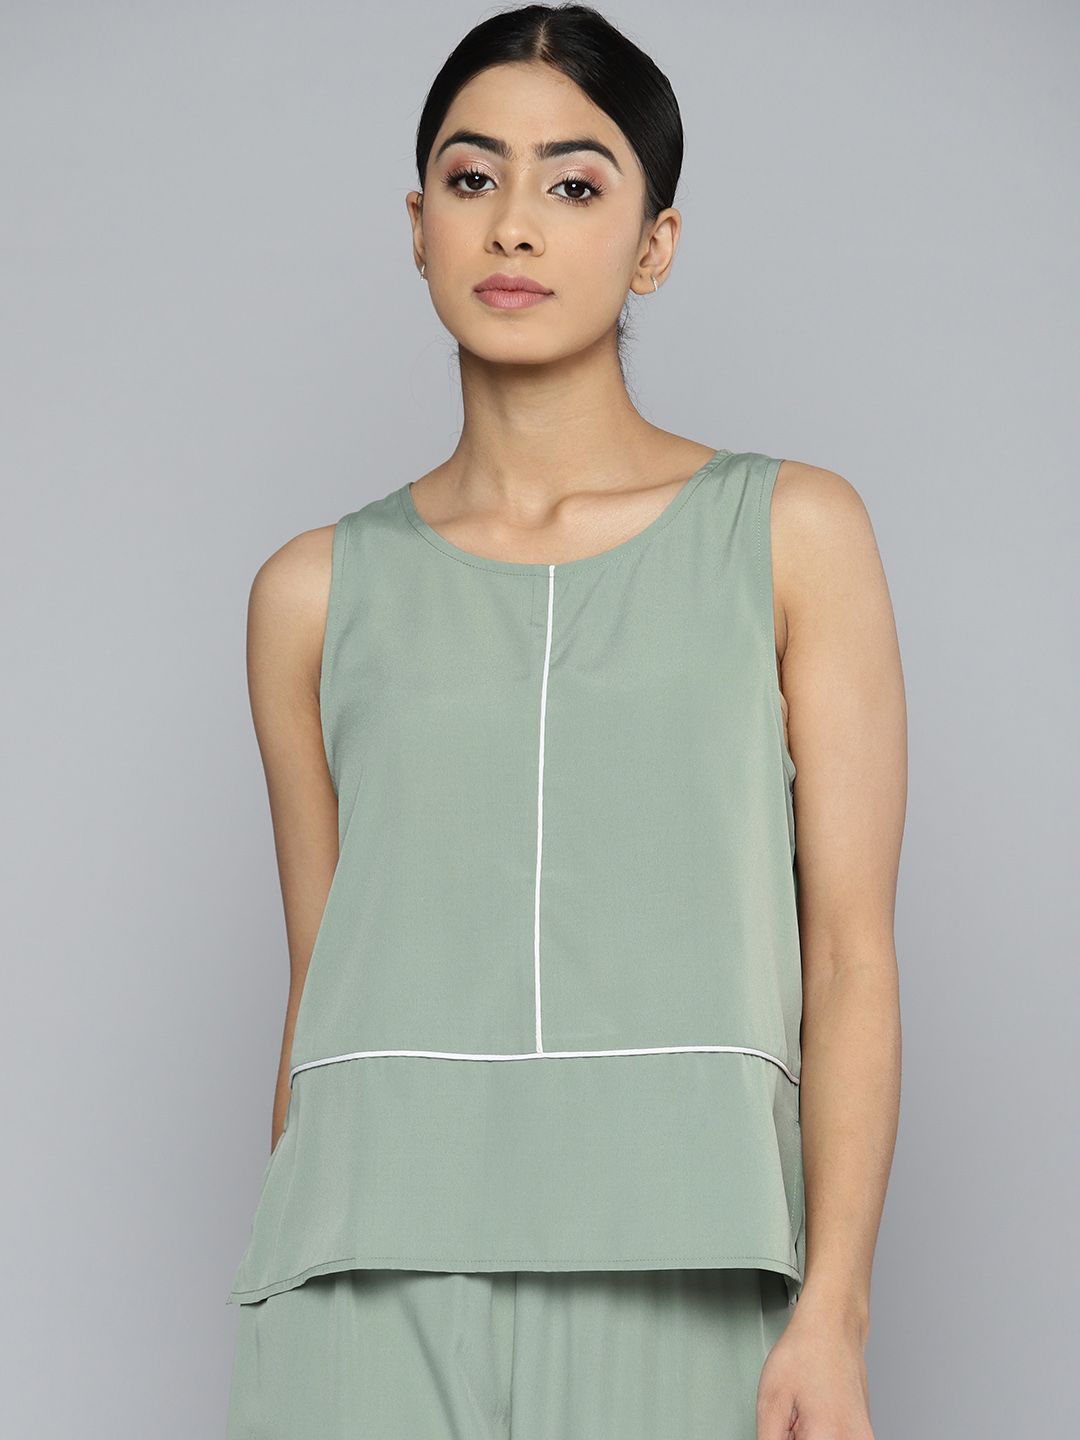 HERE&NOW Sleeveless Top Price in India